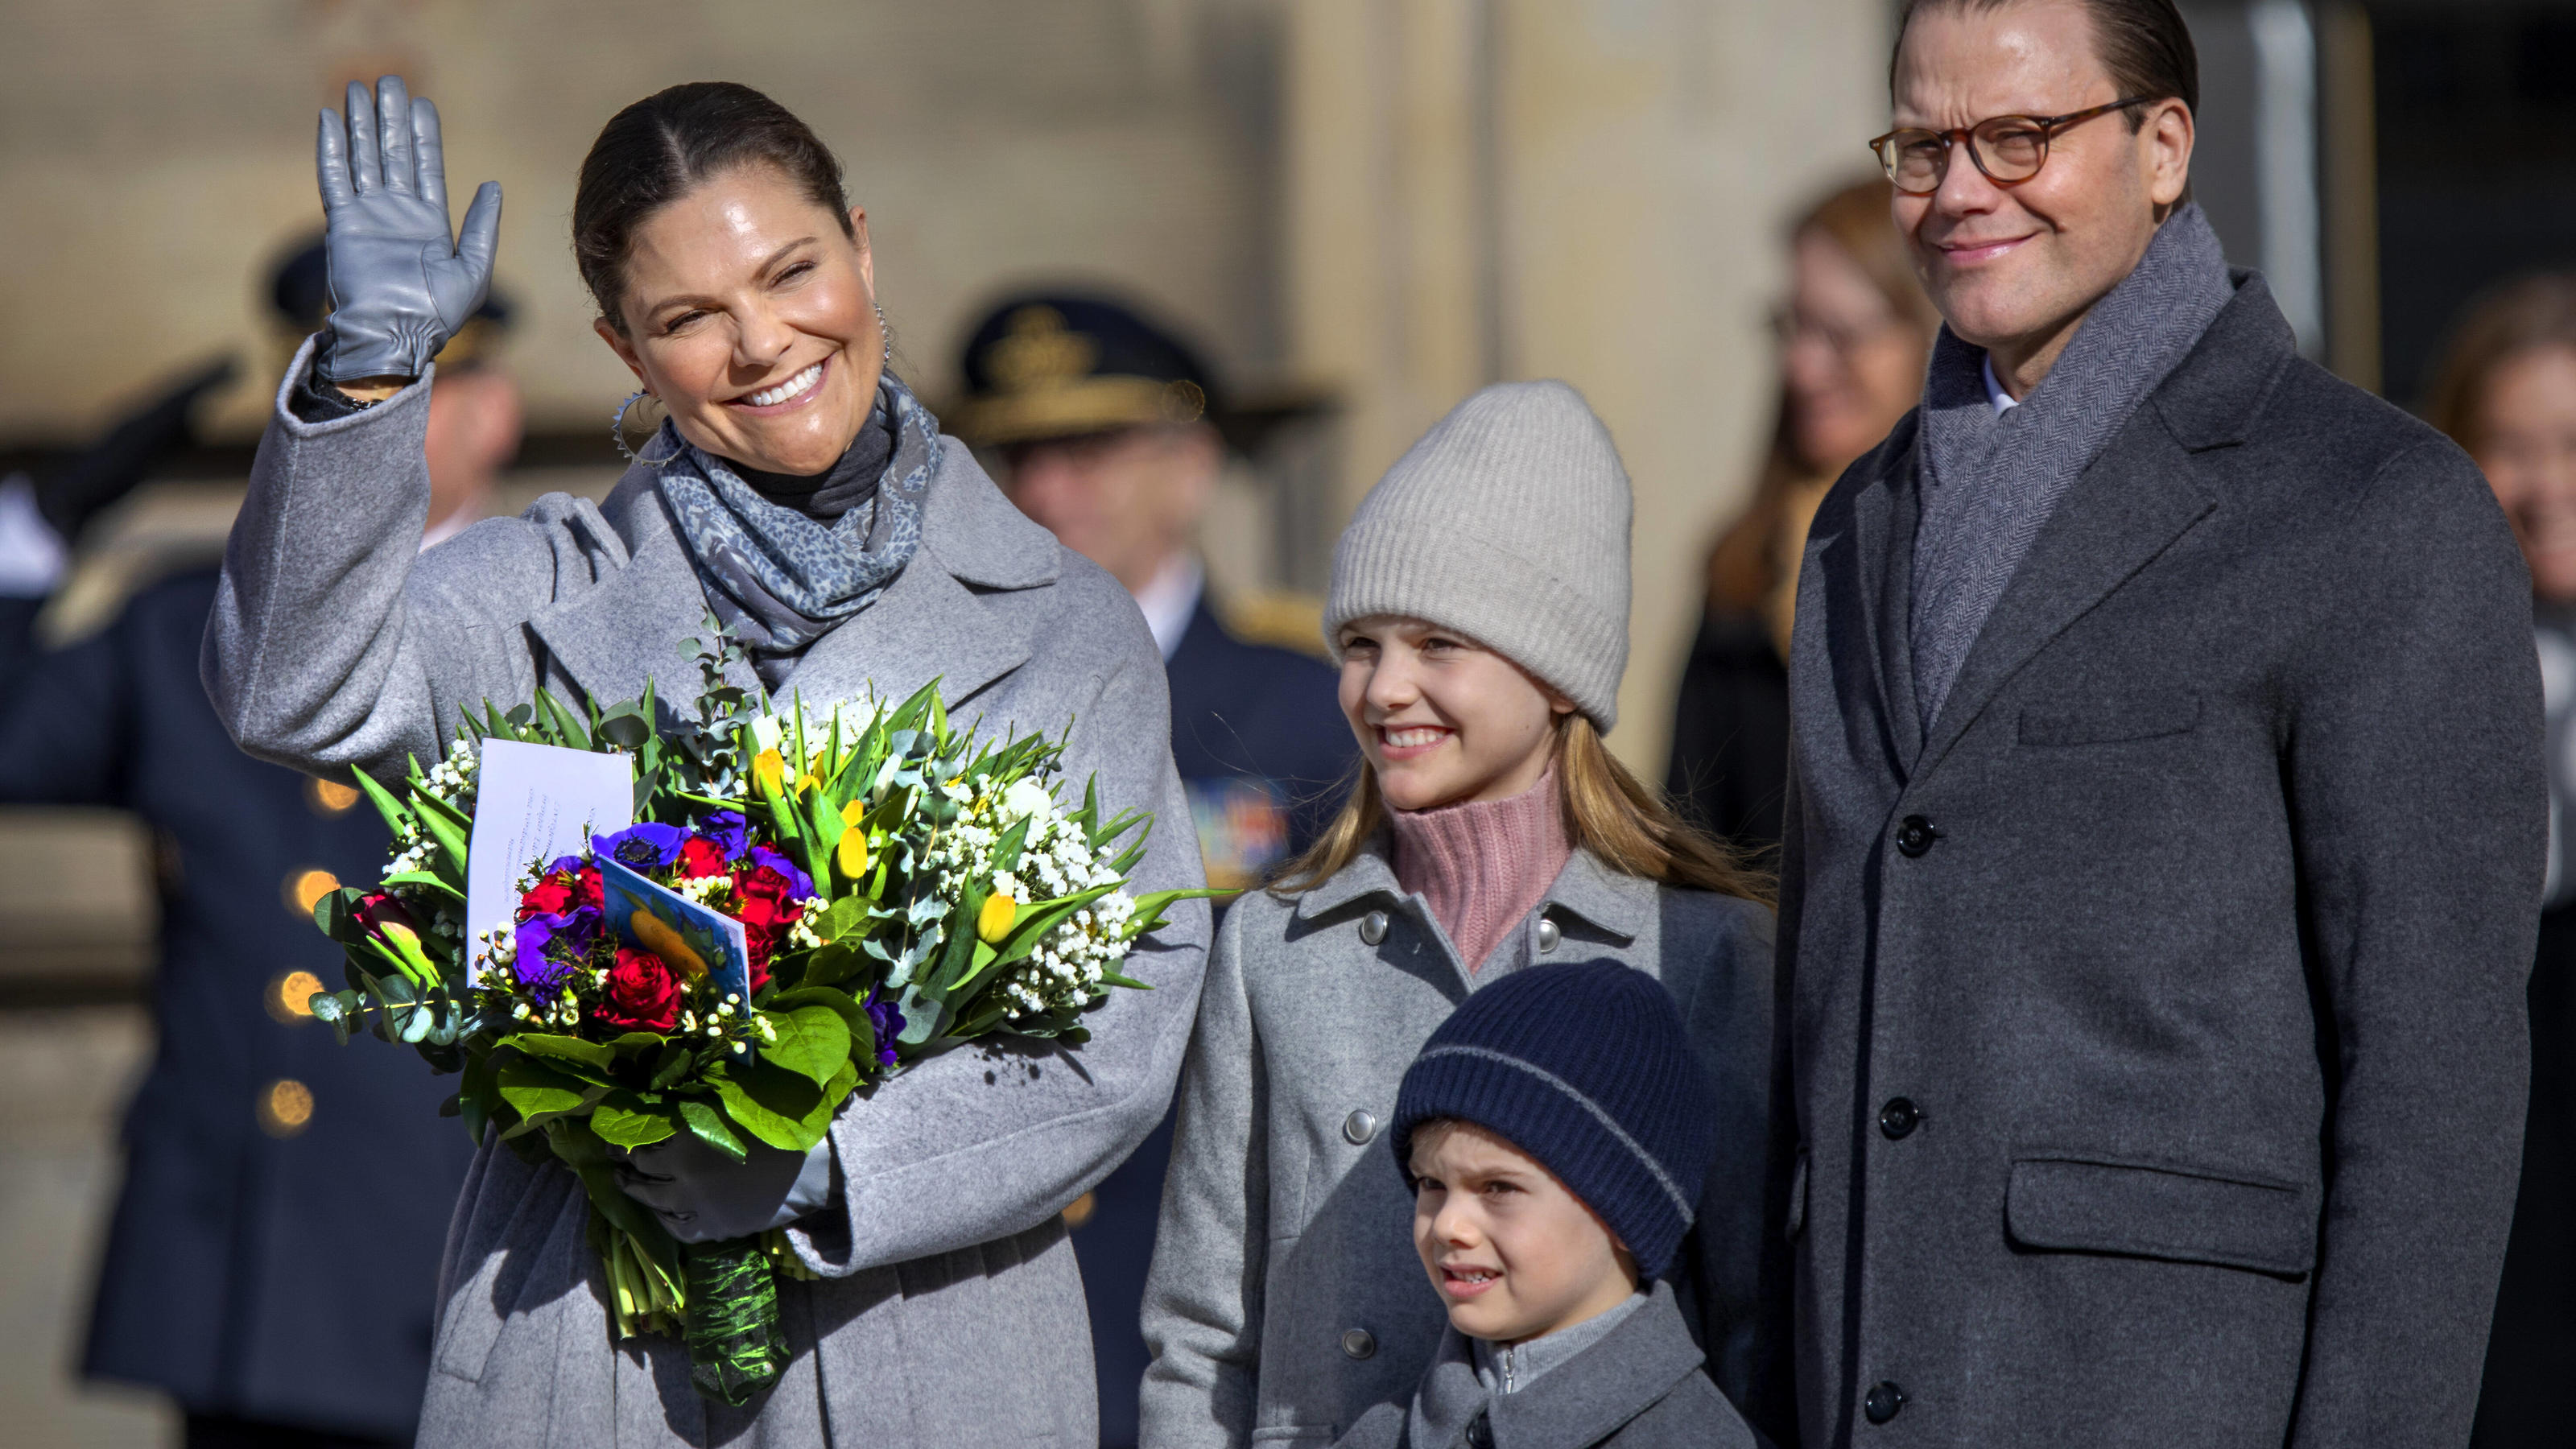  12-03-2022 Sweden Princess Victoria and Prince Daniel and Princess Estelle and Prince Oscar during the celebrations for the crownprincess her nameday at the innercourt of the Royal Palace in Stockholm.  PUBLICATIONxINxGERxSUIxAUTxONLY Copyright: xPP